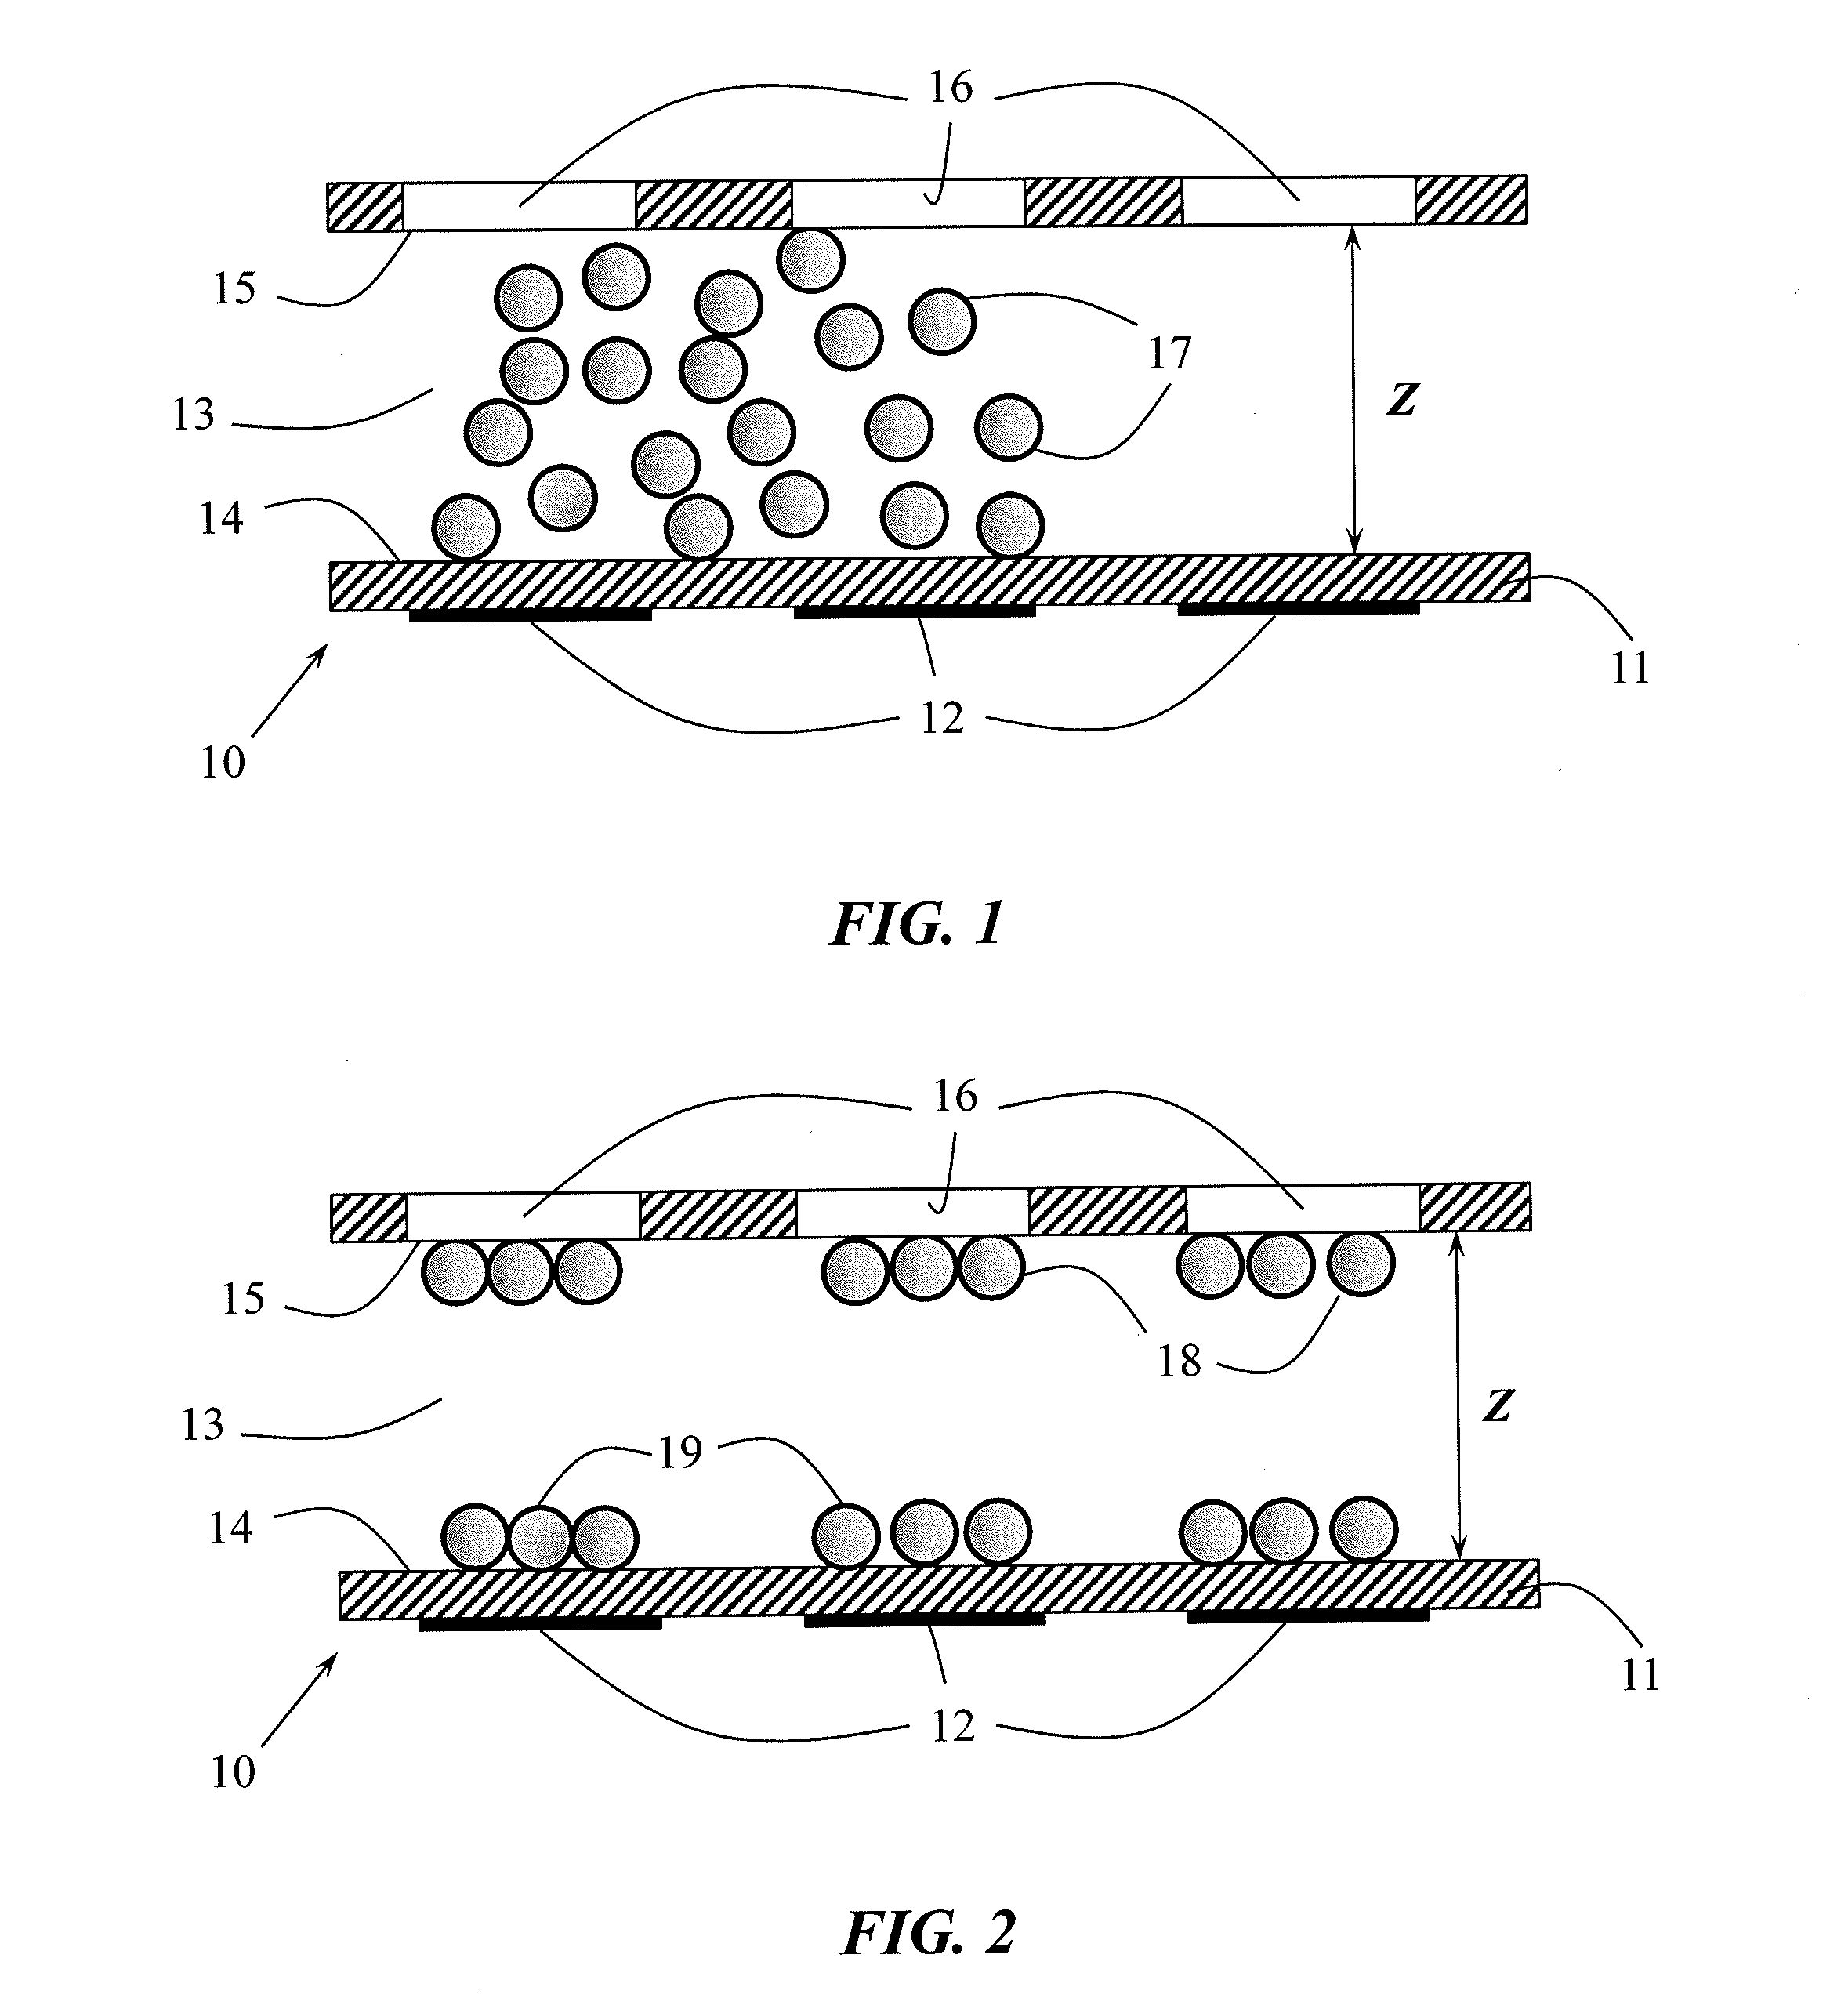 Devices and methods for monitoring and controlling temperature in a microfluidic environment